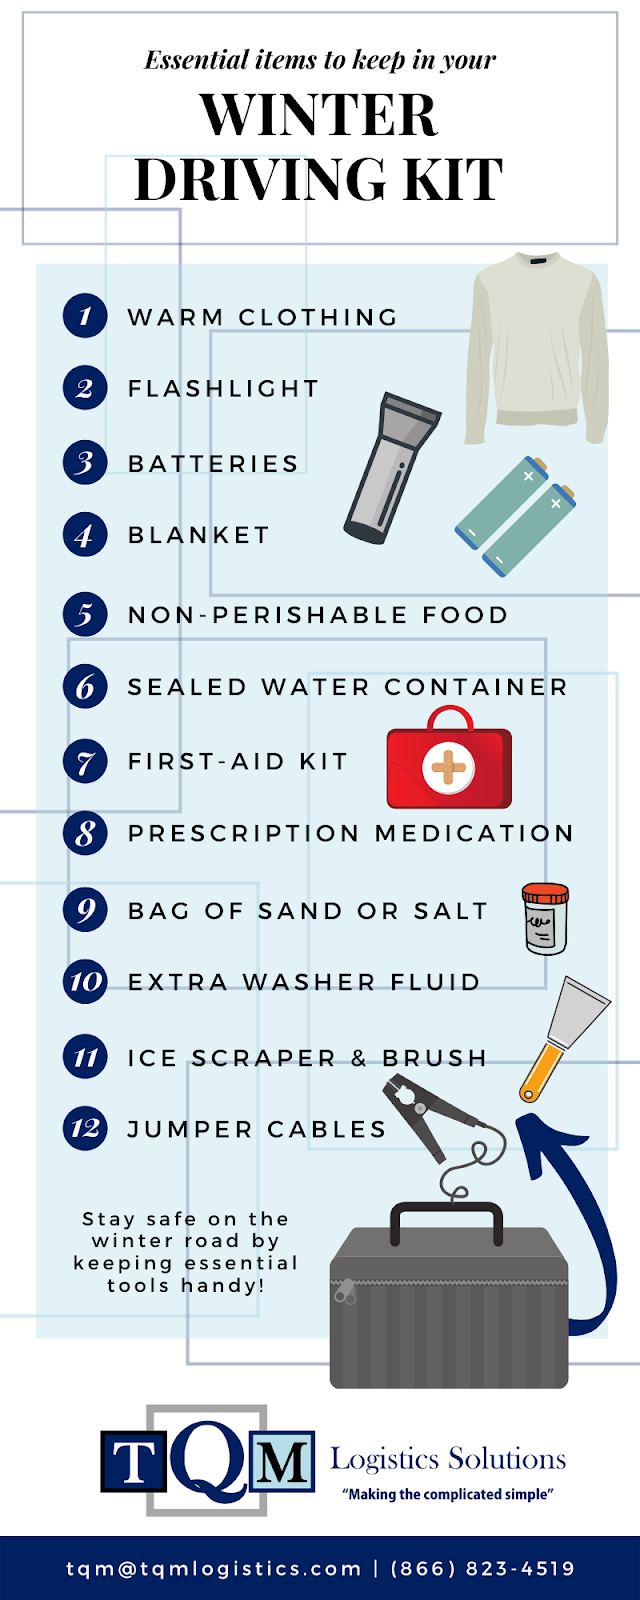 List of essential items for truck drivers to keep in their winter driving kit